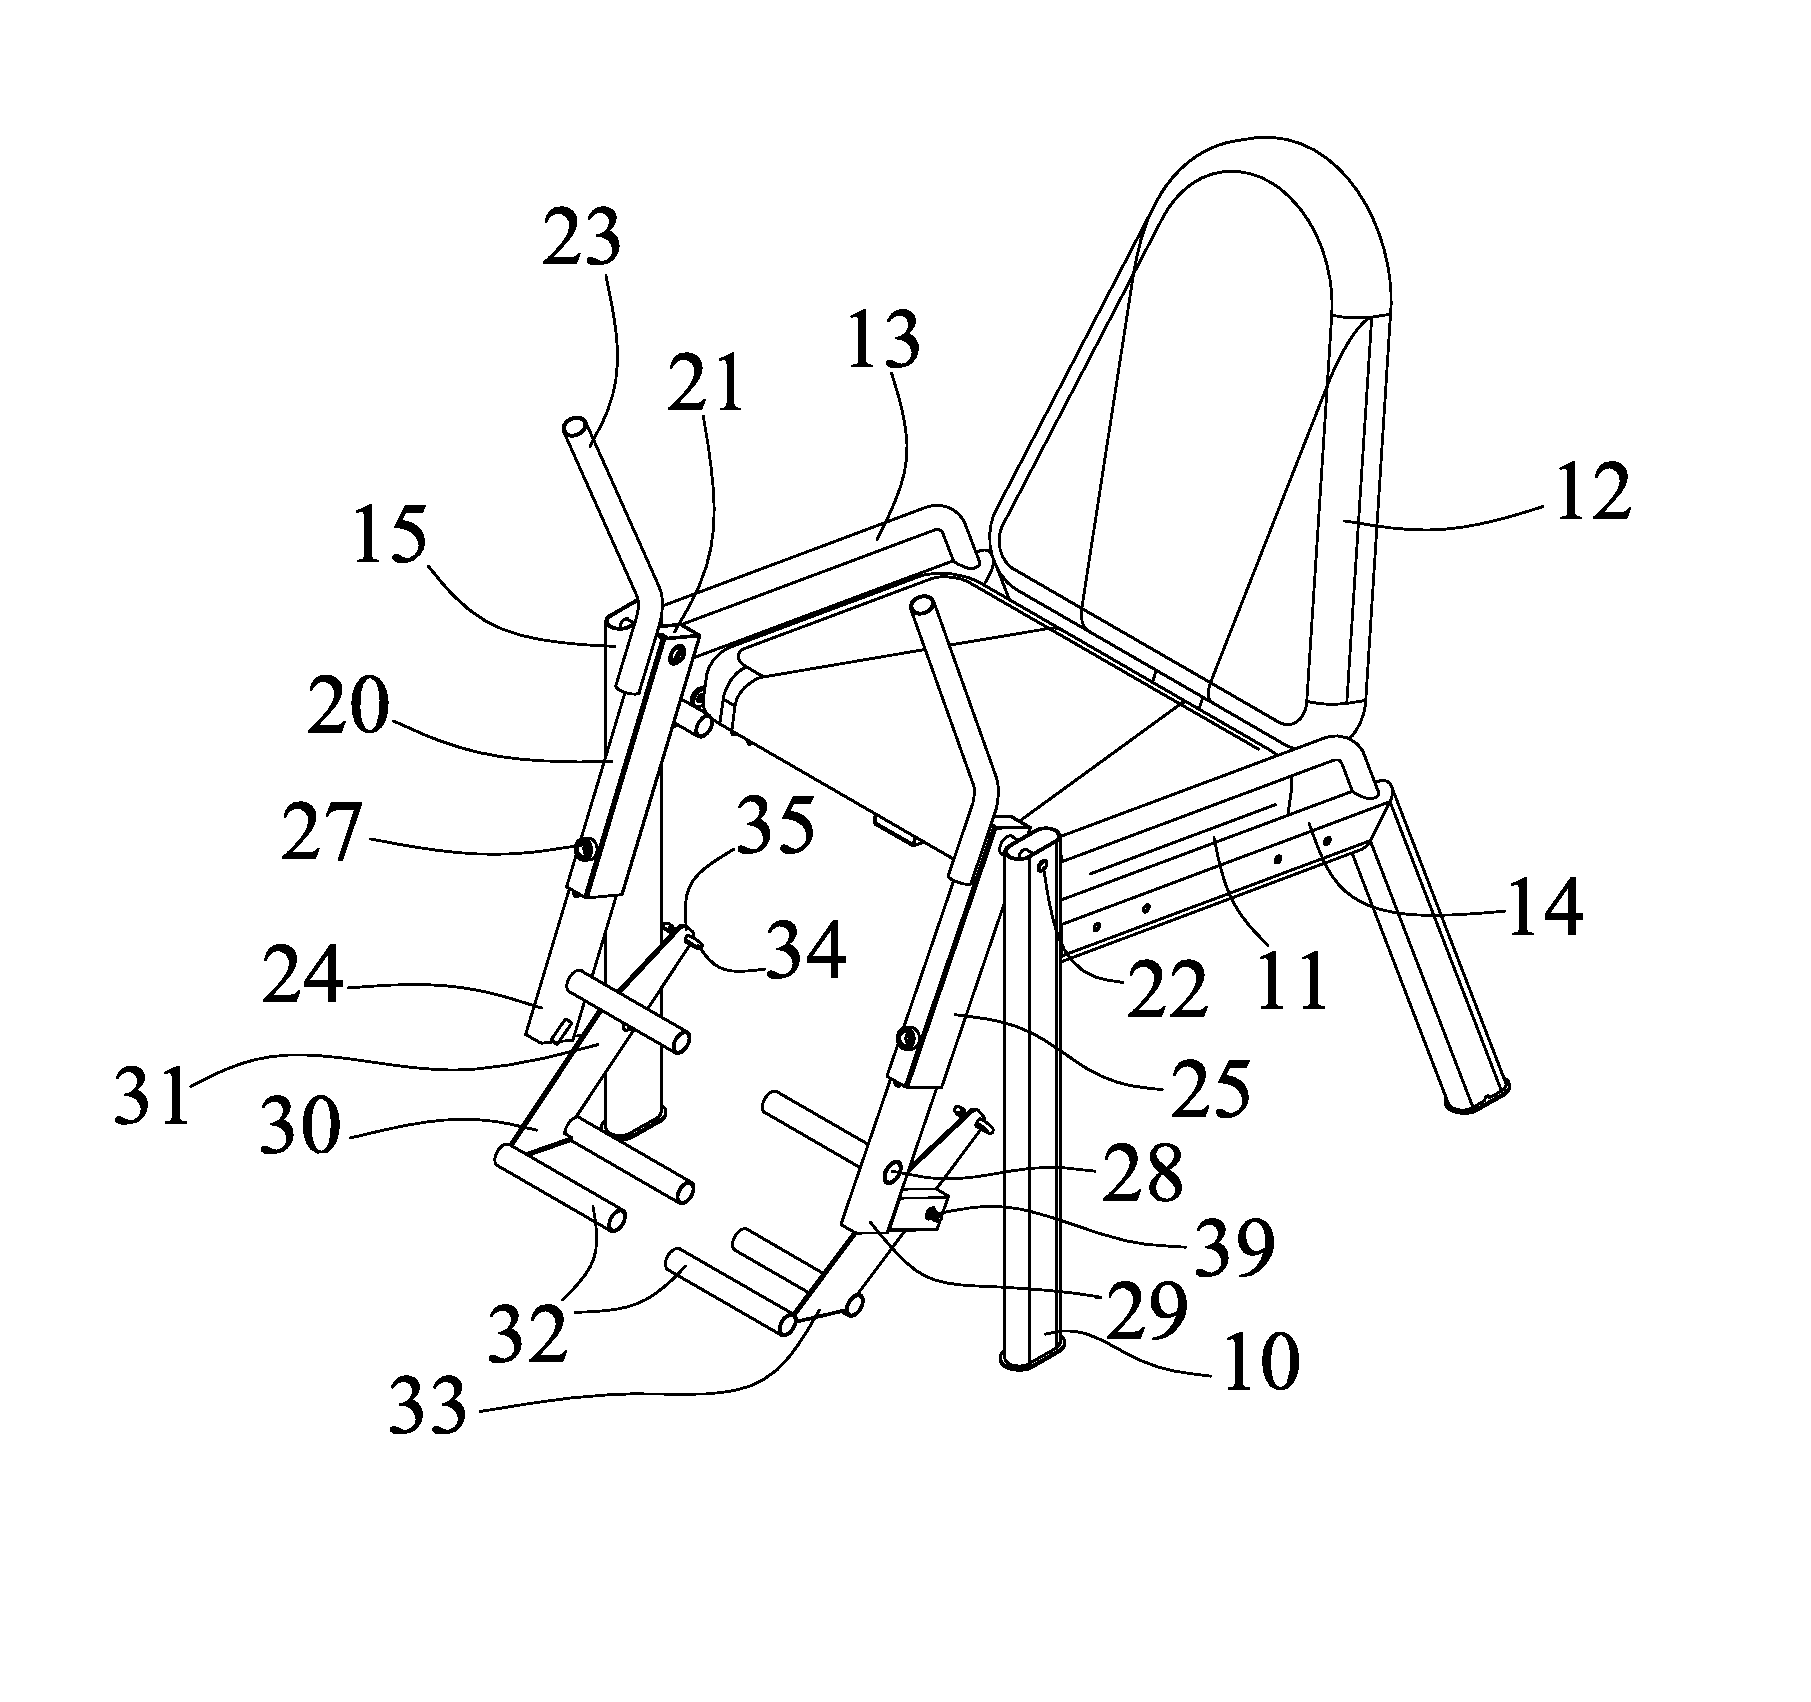 Rehabilitation or exercising chair device